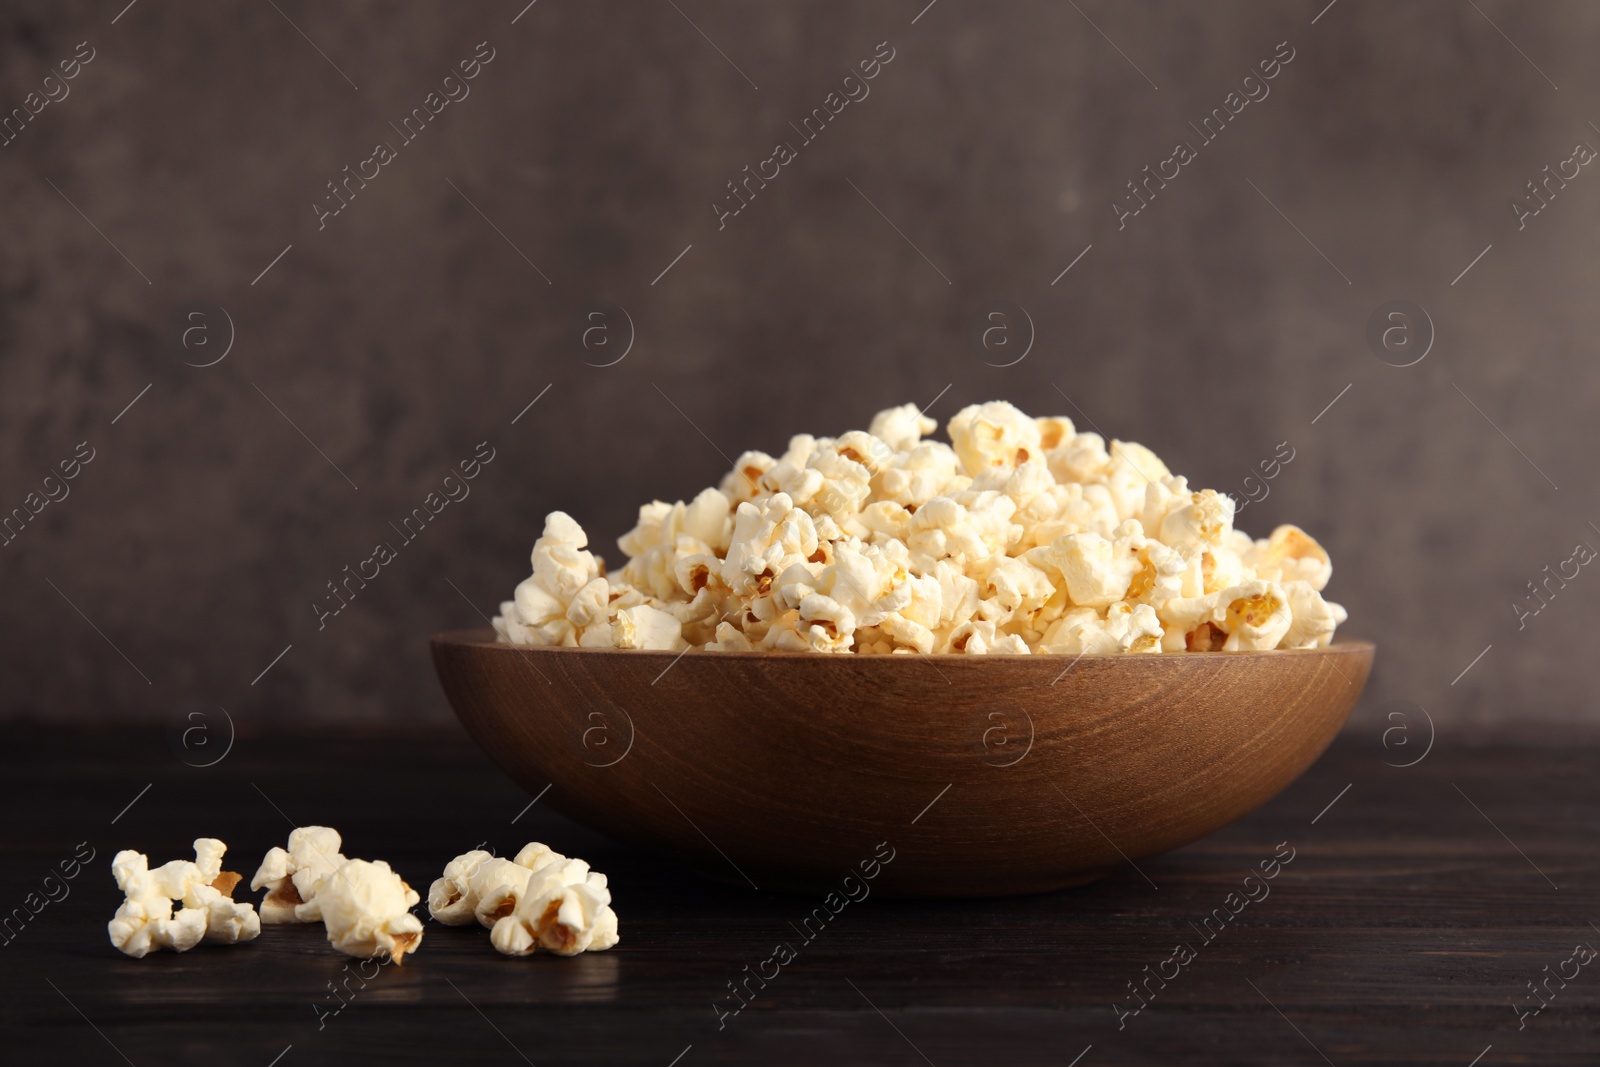 Photo of Bowl of tasty popcorn on wooden table